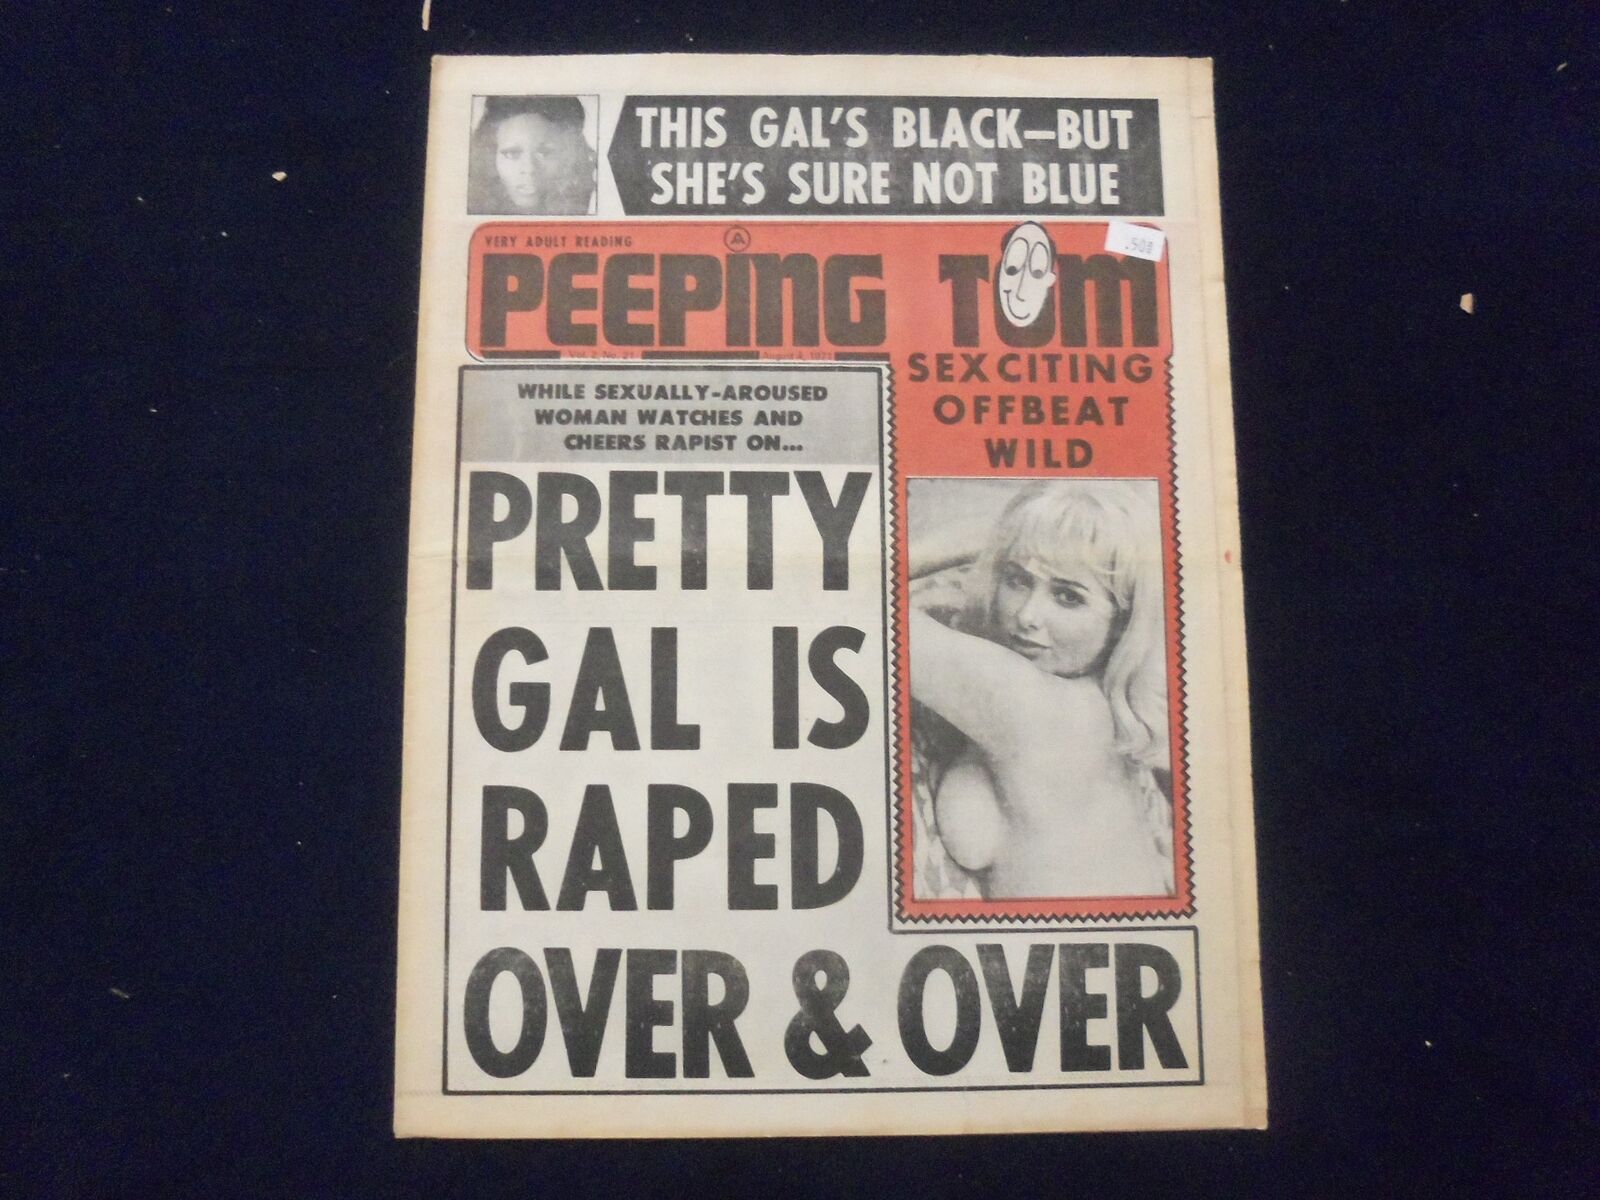 1971 AUGUST 4 PEEPING TOM NEWSPAPER - PRETTY GAL IS RAPED OVER & OVER - NP 7293